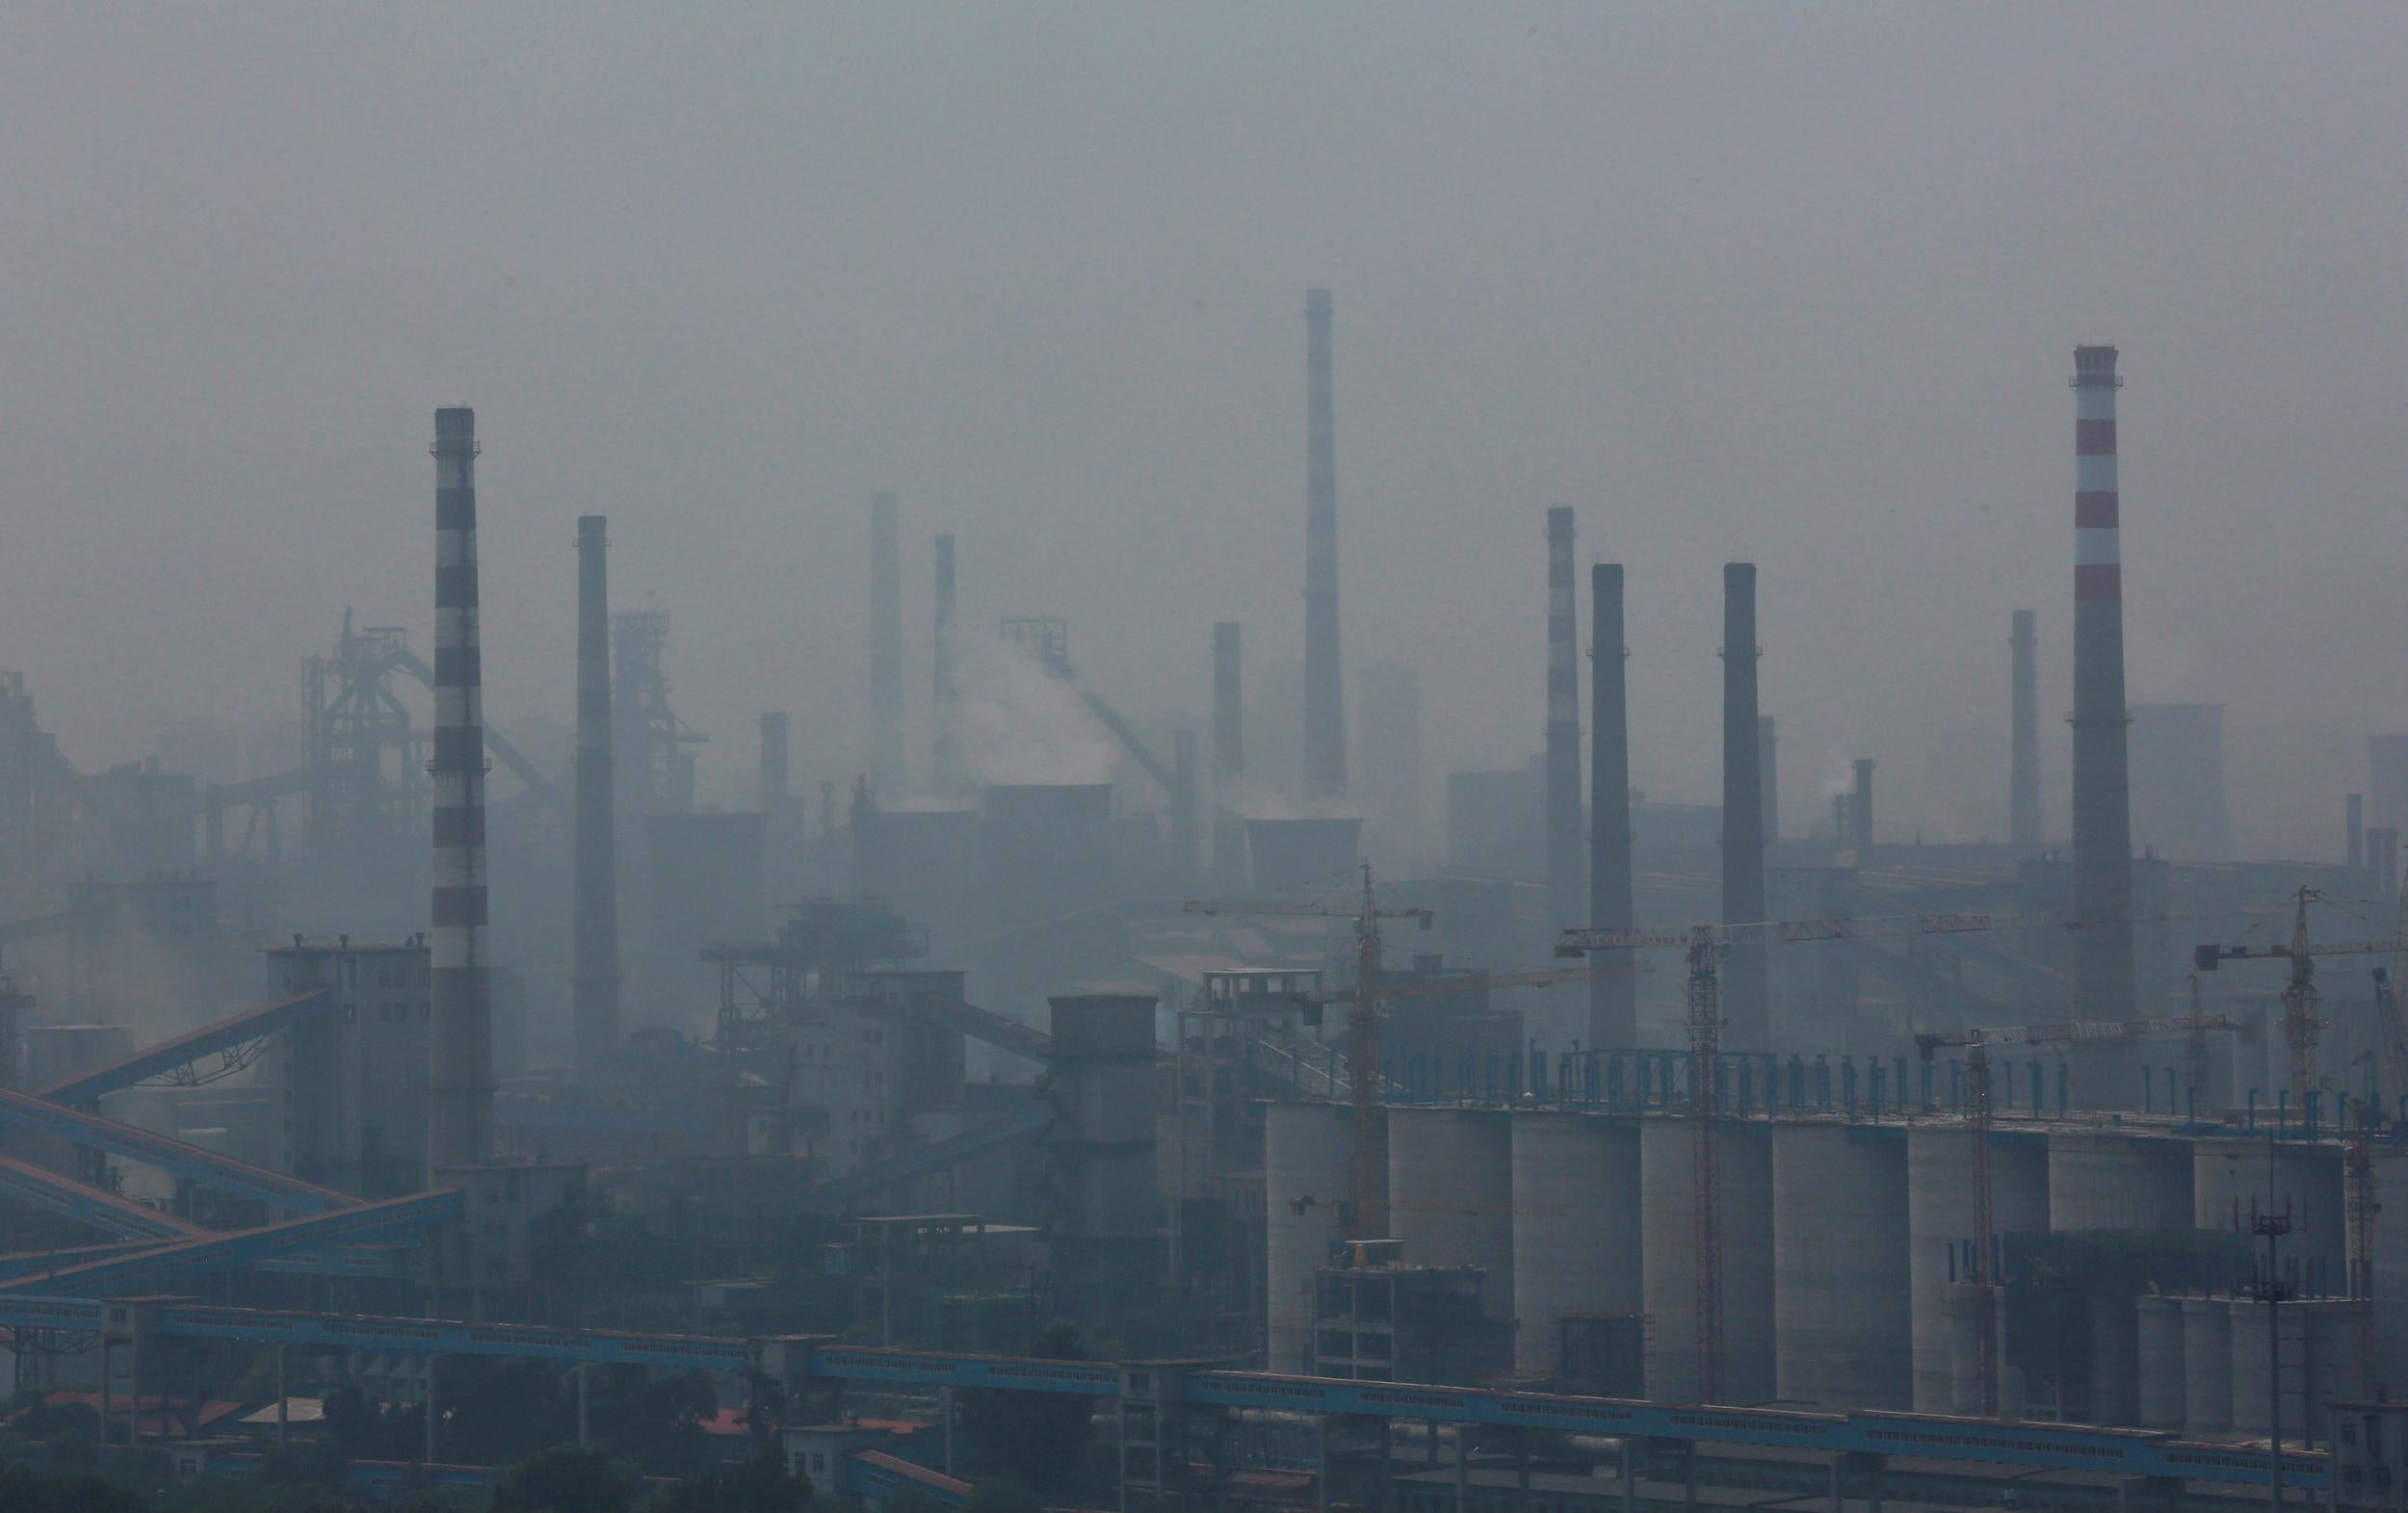 China has emerged as a global leader on addressing the threat of climate change